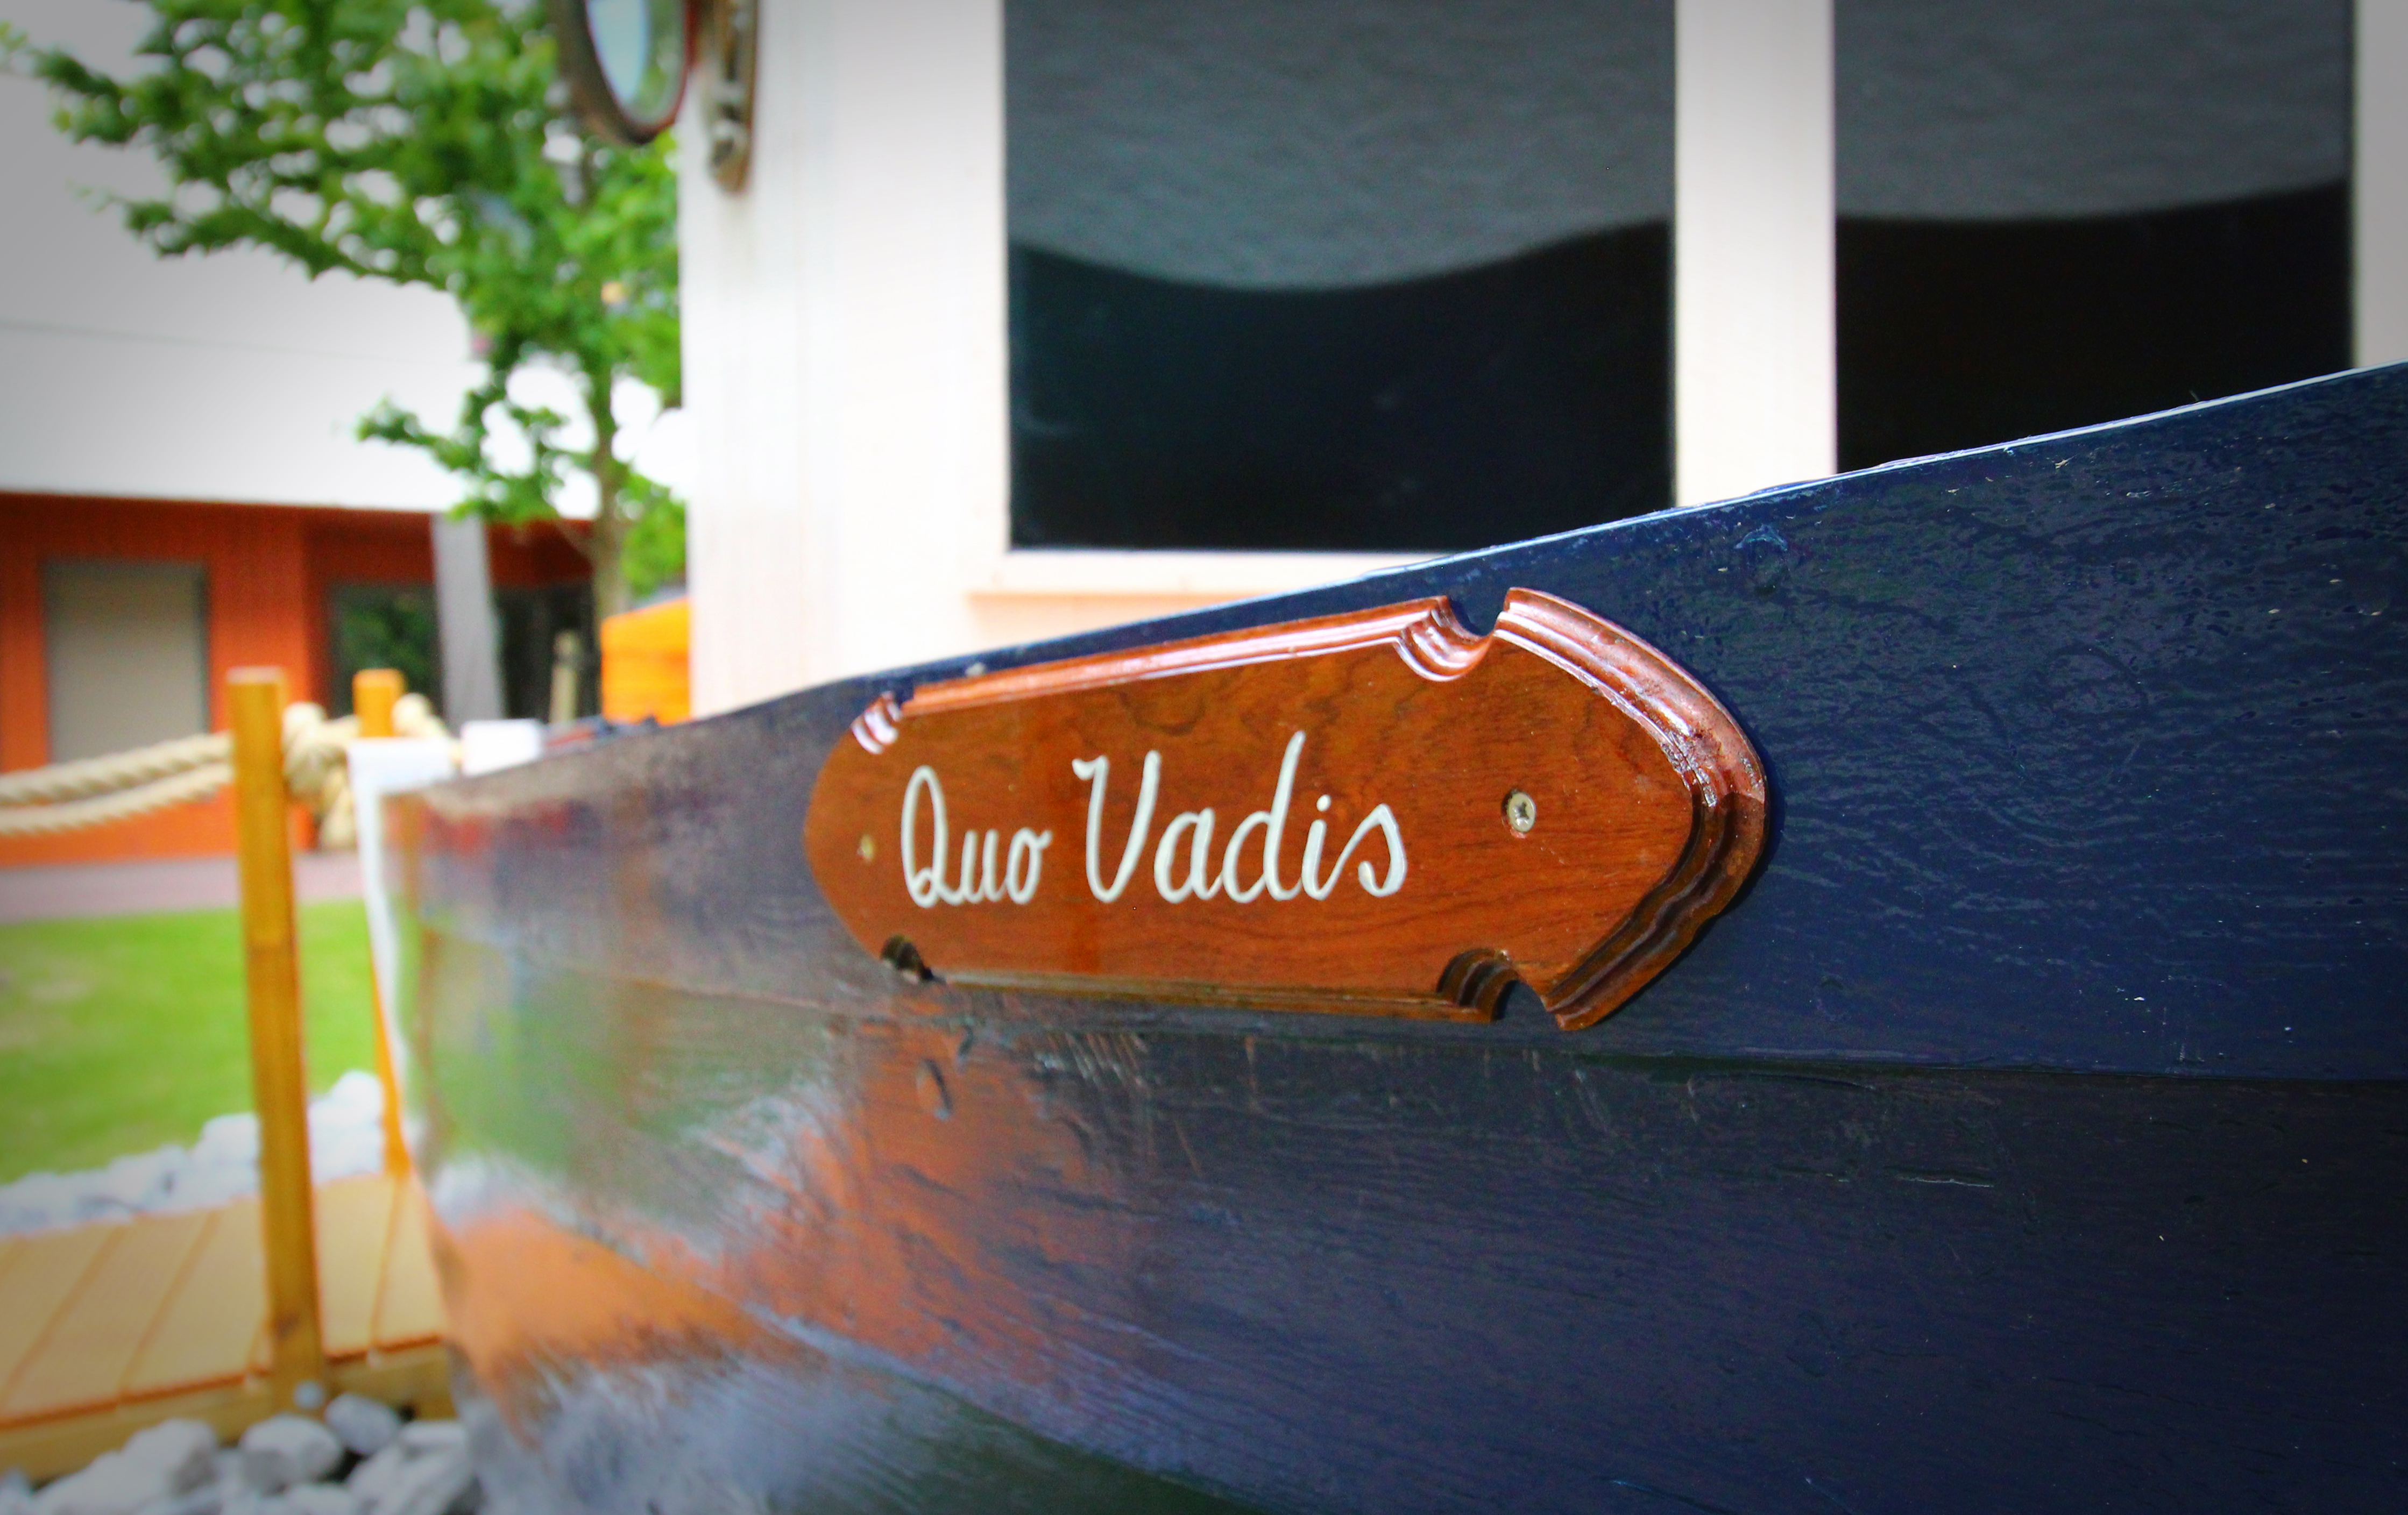 The boat was was named Quo Vadis, Latin for “Whither goest thou?” or “Where are you traveling?”